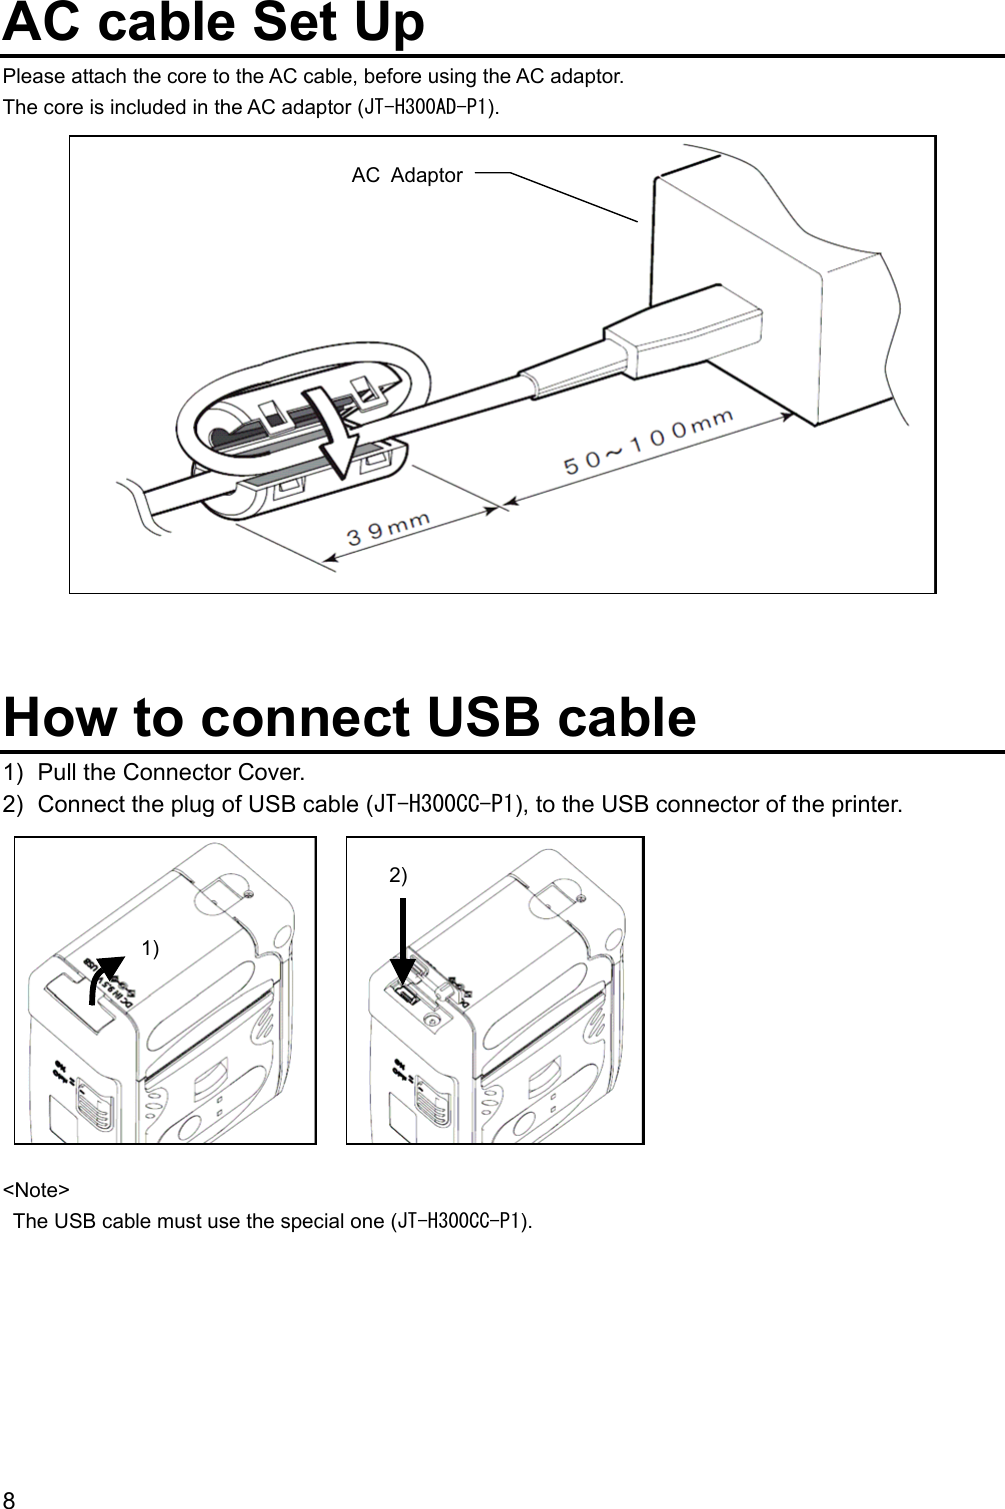 8  AC cable Set Up Please attach the core to the AC cable, before using the AC adaptor. The core is included in the AC adaptor (JT-H300AD-P1).                 How to connect USB cable 1)  Pull the Connector Cover. 2)  Connect the plug of USB cable (JT-H300CC-P1), to the USB connector of the printer.           &lt;Note&gt;   The USB cable must use the special one (JT-H300CC-P1).    1) 2) AC Adaptor